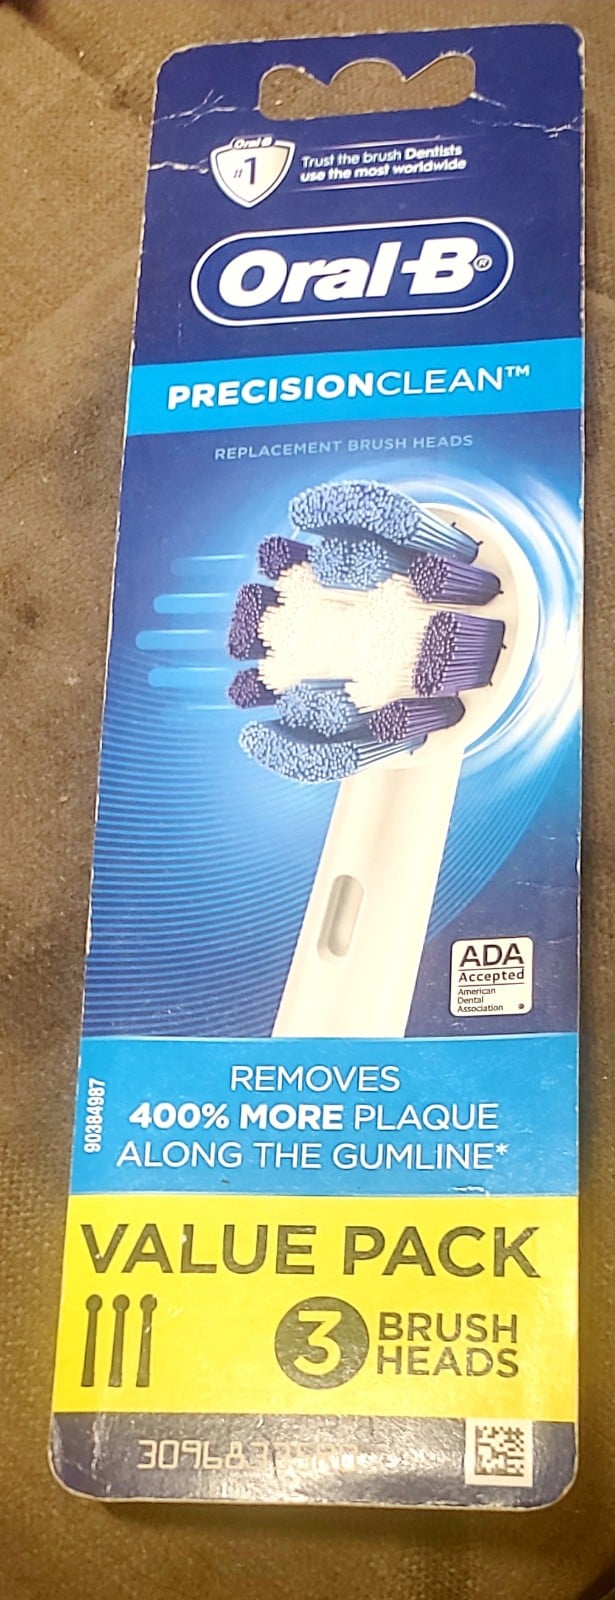 Oral B precisionCLEAN replacement brush heads 200dxDZey